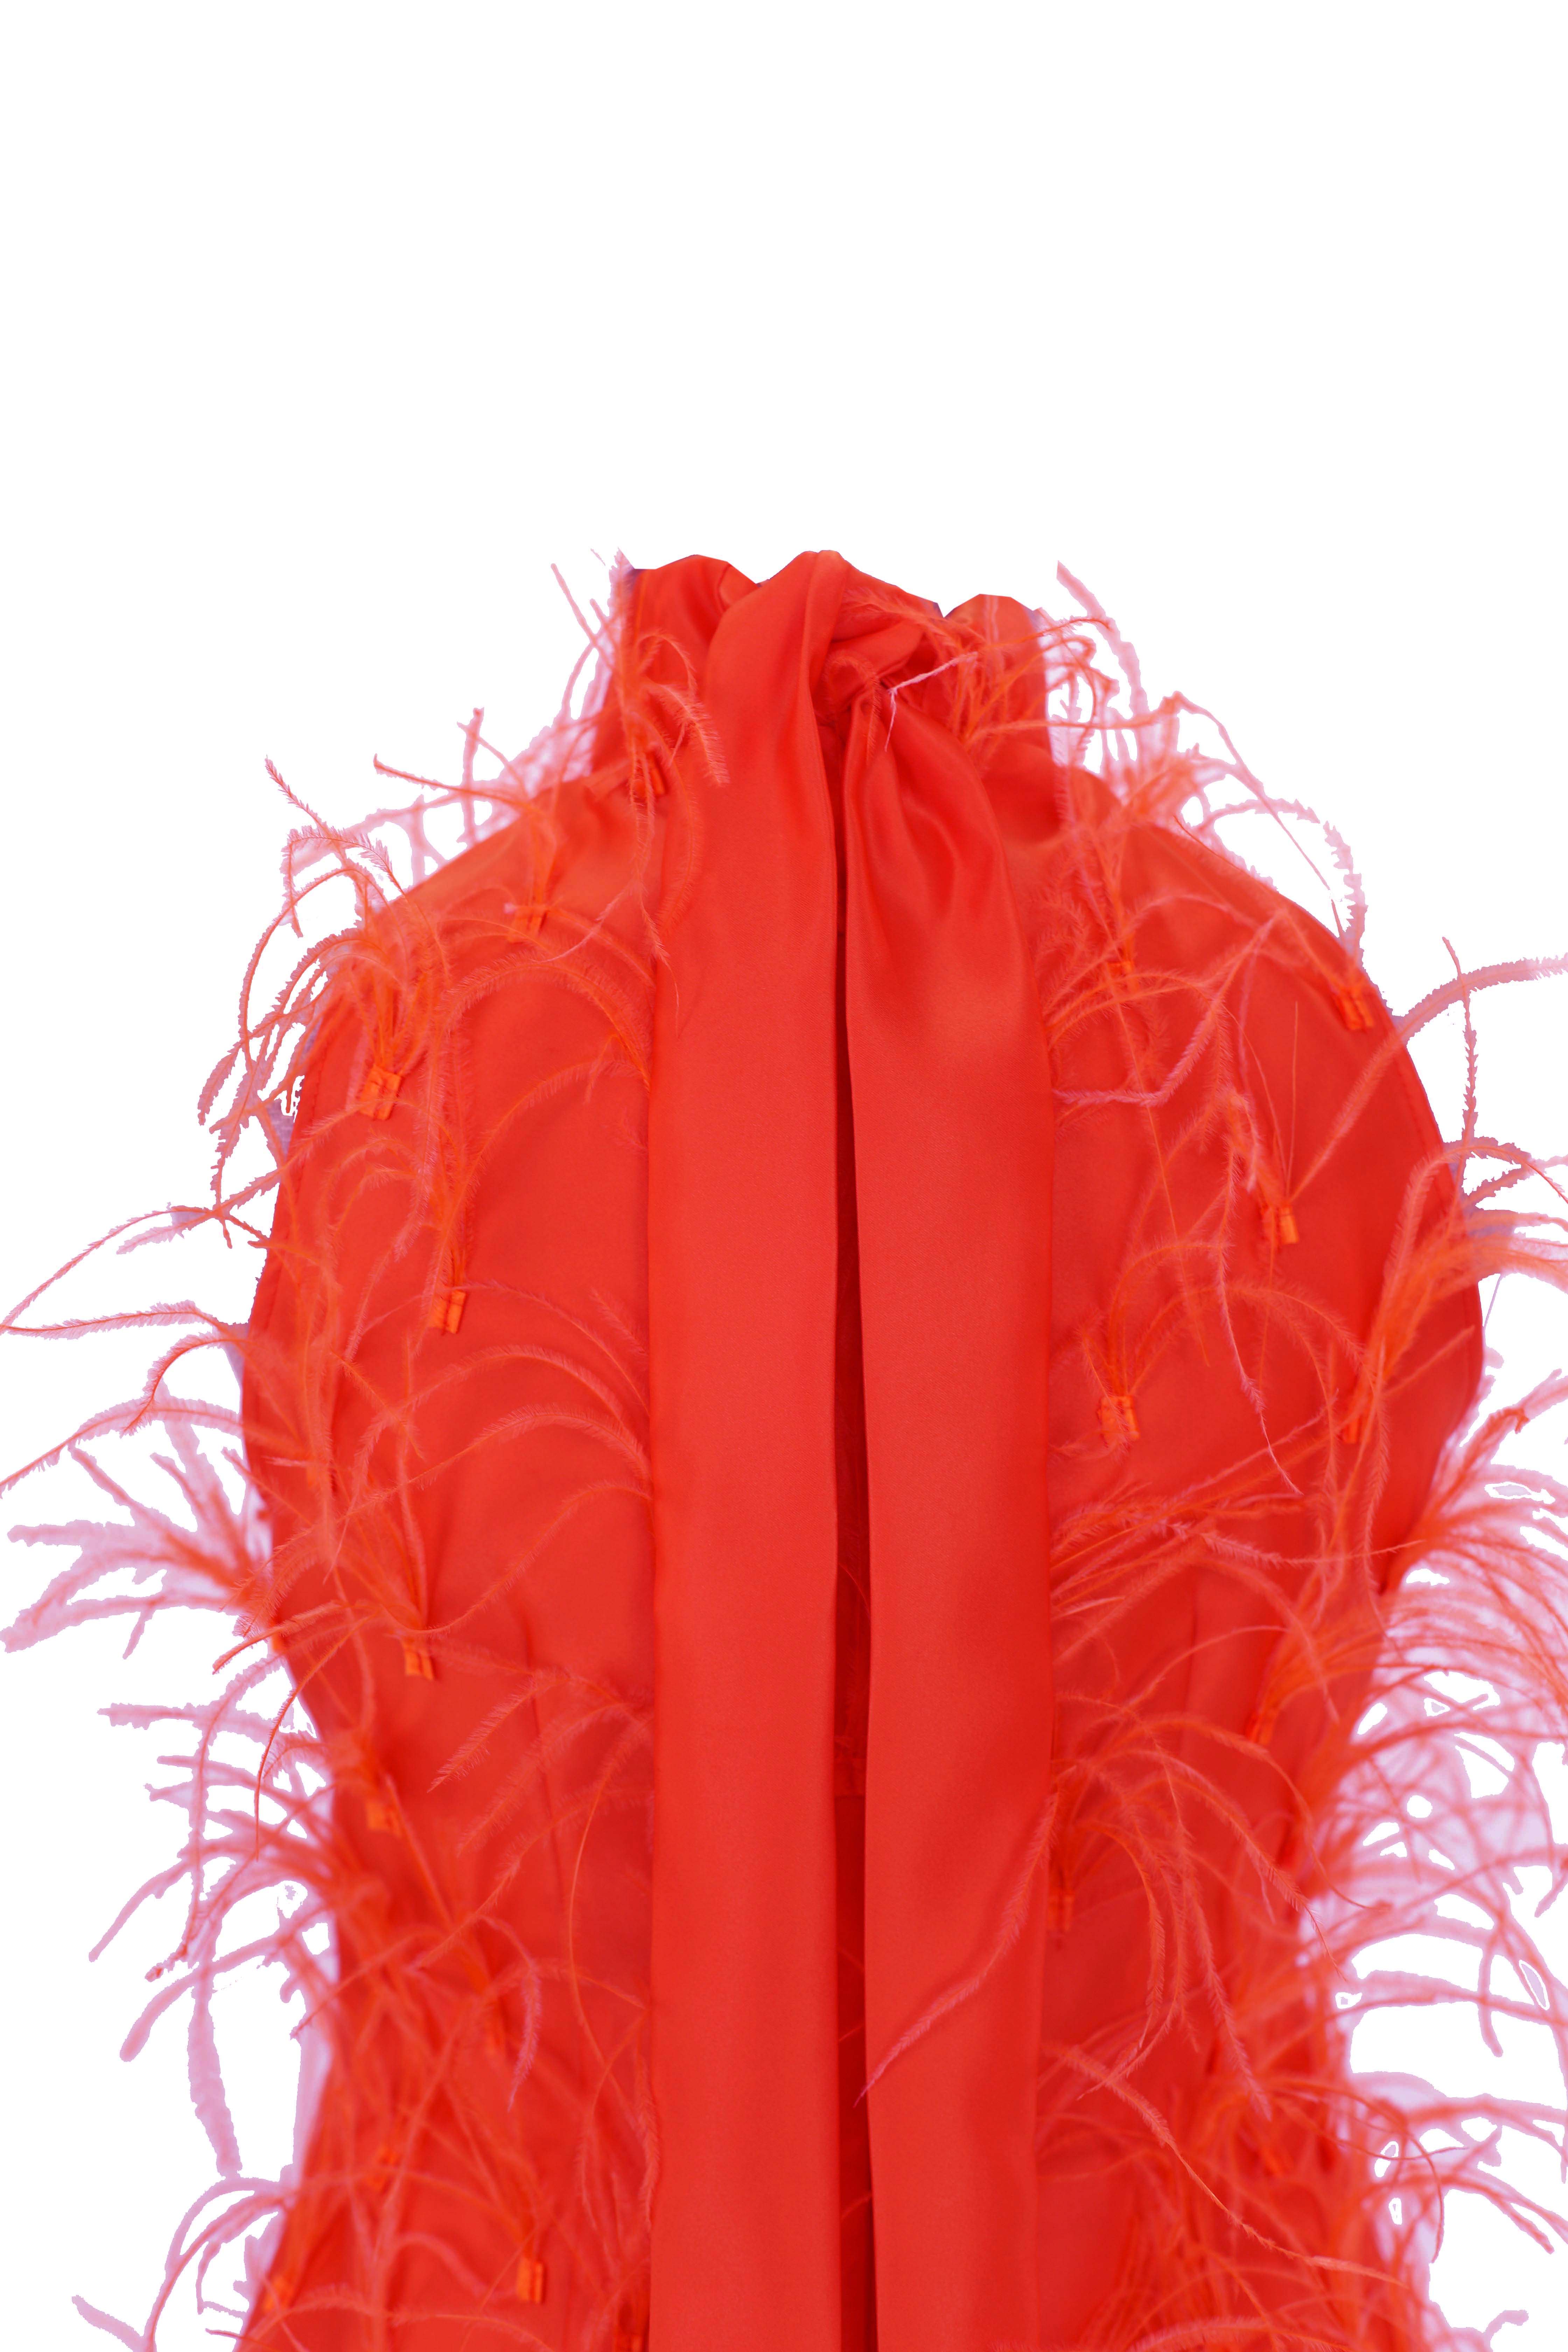 R23101 - RED 01 - ALMEEA red mini dress with feathers - AMBAR STUDIO